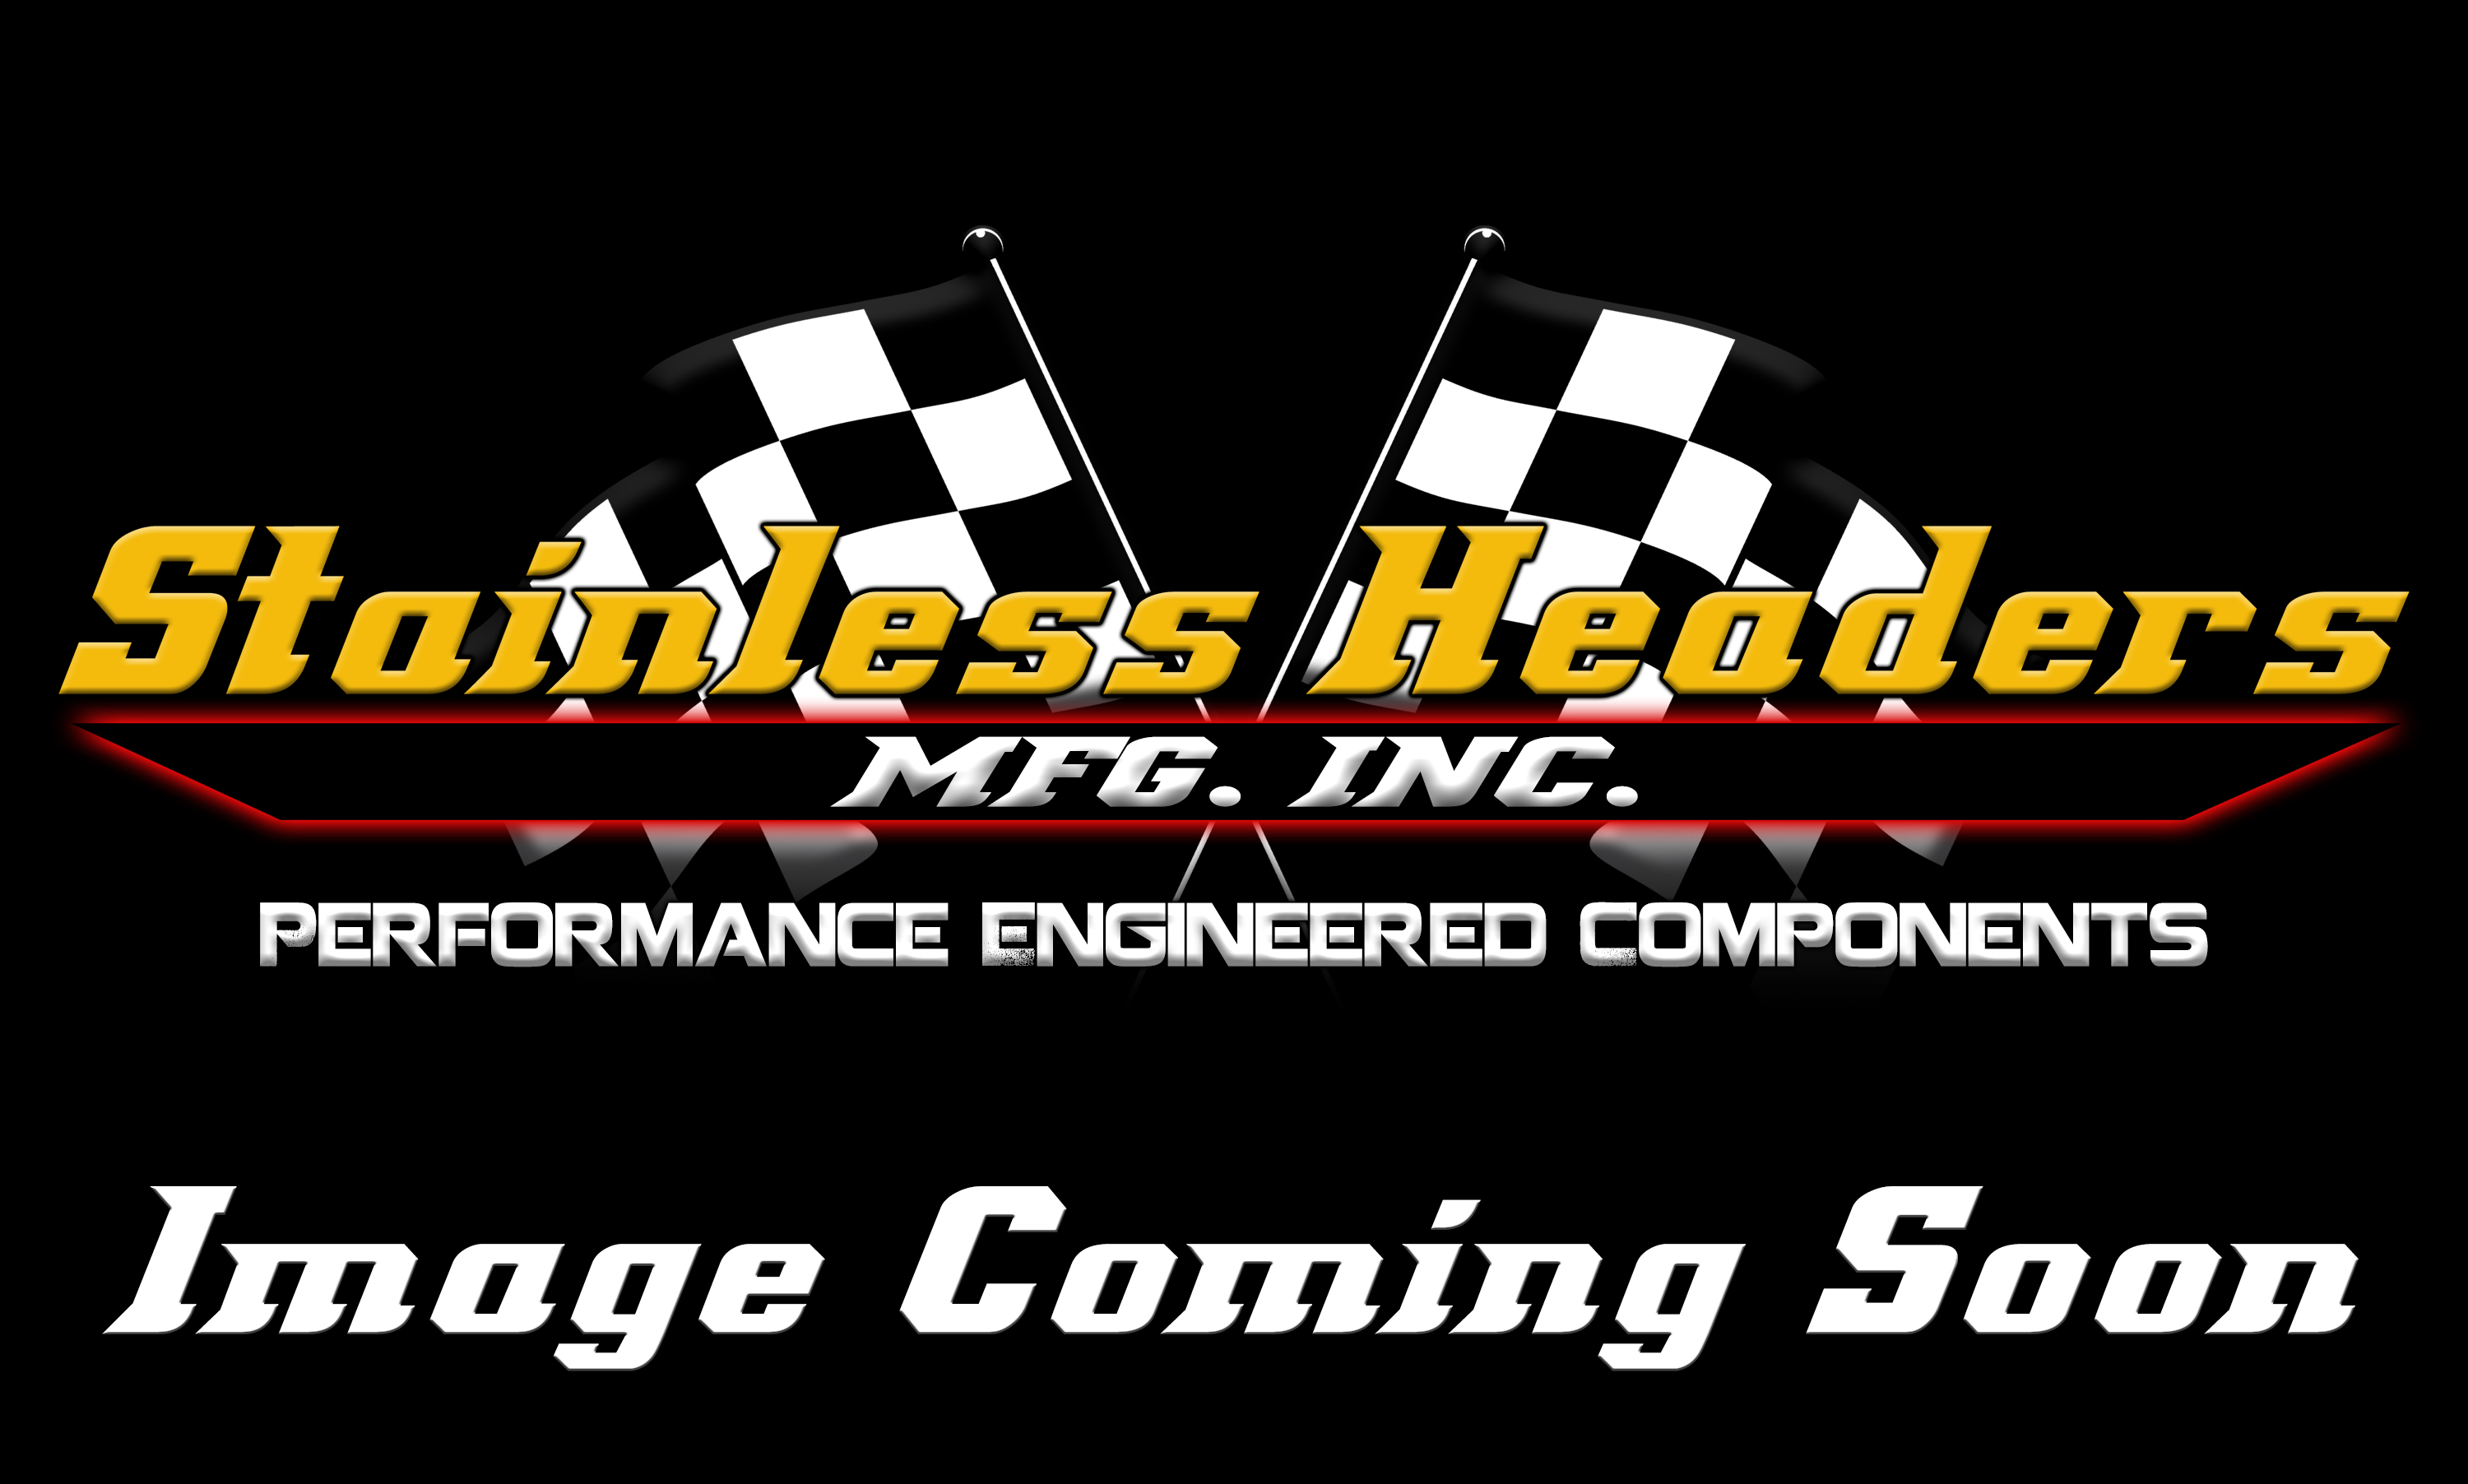 CompTurbo Technologies - CTR3893S-6767 Reverse Rotation Air-Cooled 1.0 Turbocharger (1000 HP)